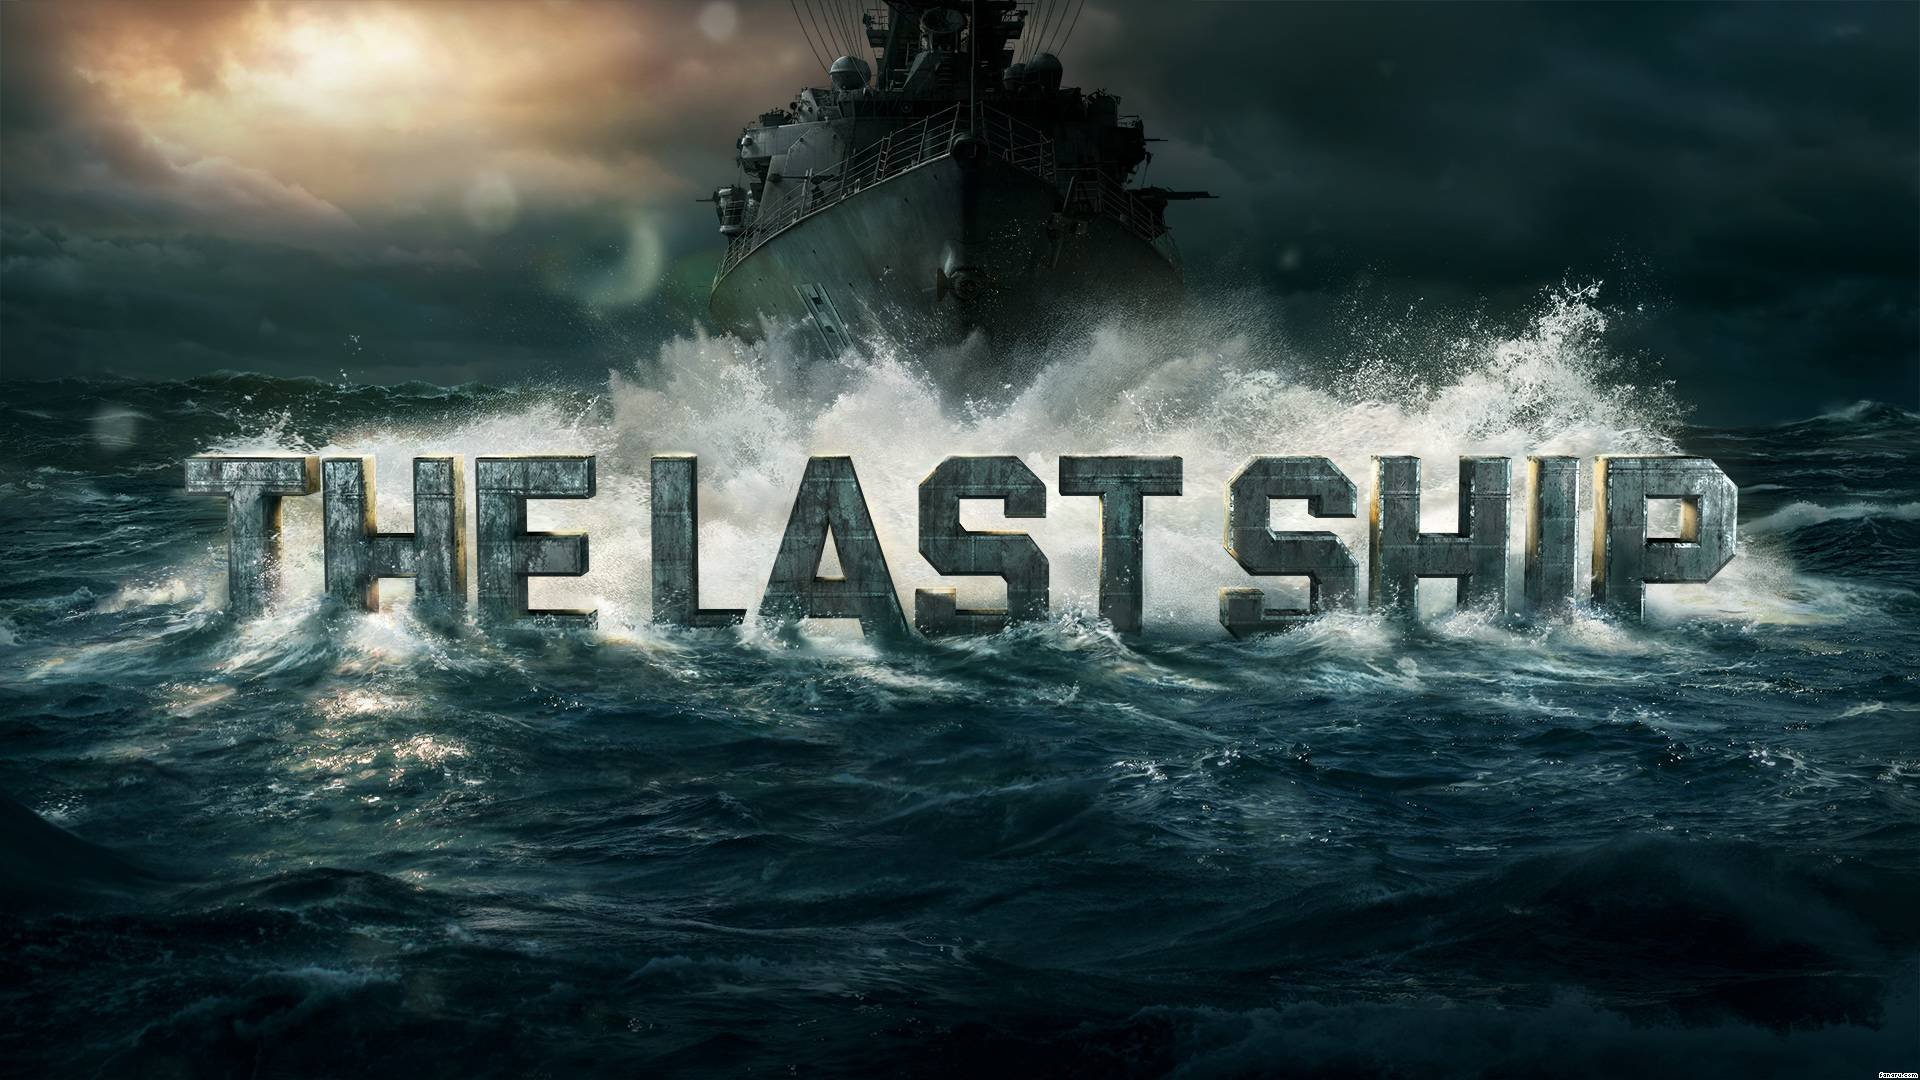 the, Last, Ship, Military, Navy, Series, Action, Drama, Apocalyptic, Sci fi, Drama, 1tls, Poster Wallpaper